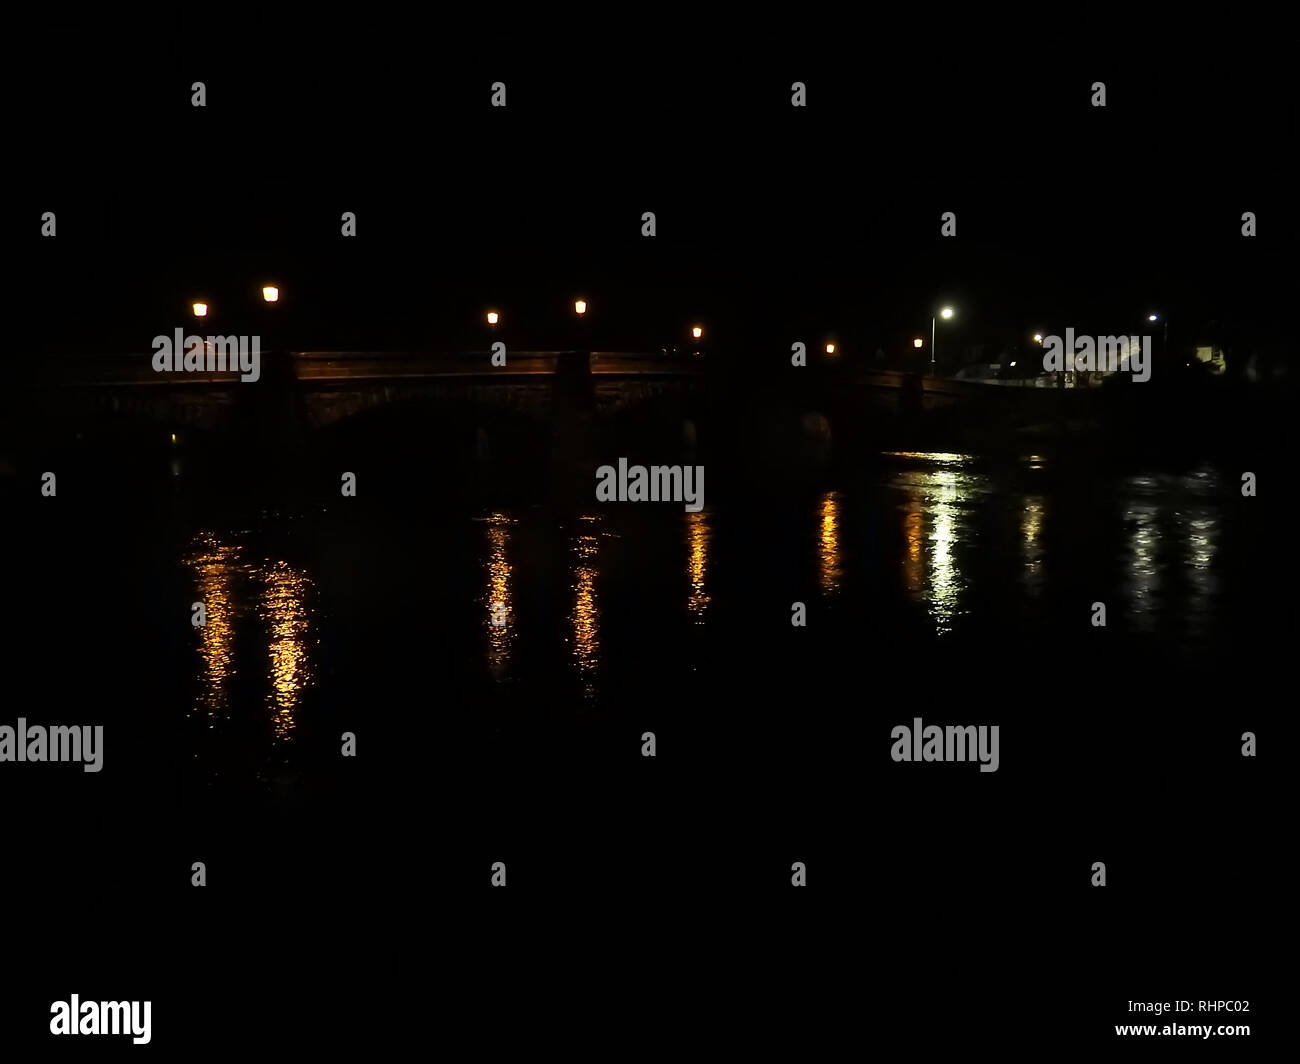 2019 - Night scene in Newton Stewart, Scotland - The bridge over the river Cree to Minnigaff (in background) was designed by John Rennie the Elder. Whilst on a pilgrimage to the shrine of St Ninian at Whithorn in 1329  Robert the Bruce forded the river where this bridge stands. The town was briefly named Newton Douglas and is presently twinned with Marcoussis, France. The horror film The Wicker Man was filmed almost entirely in the area Stock Photo